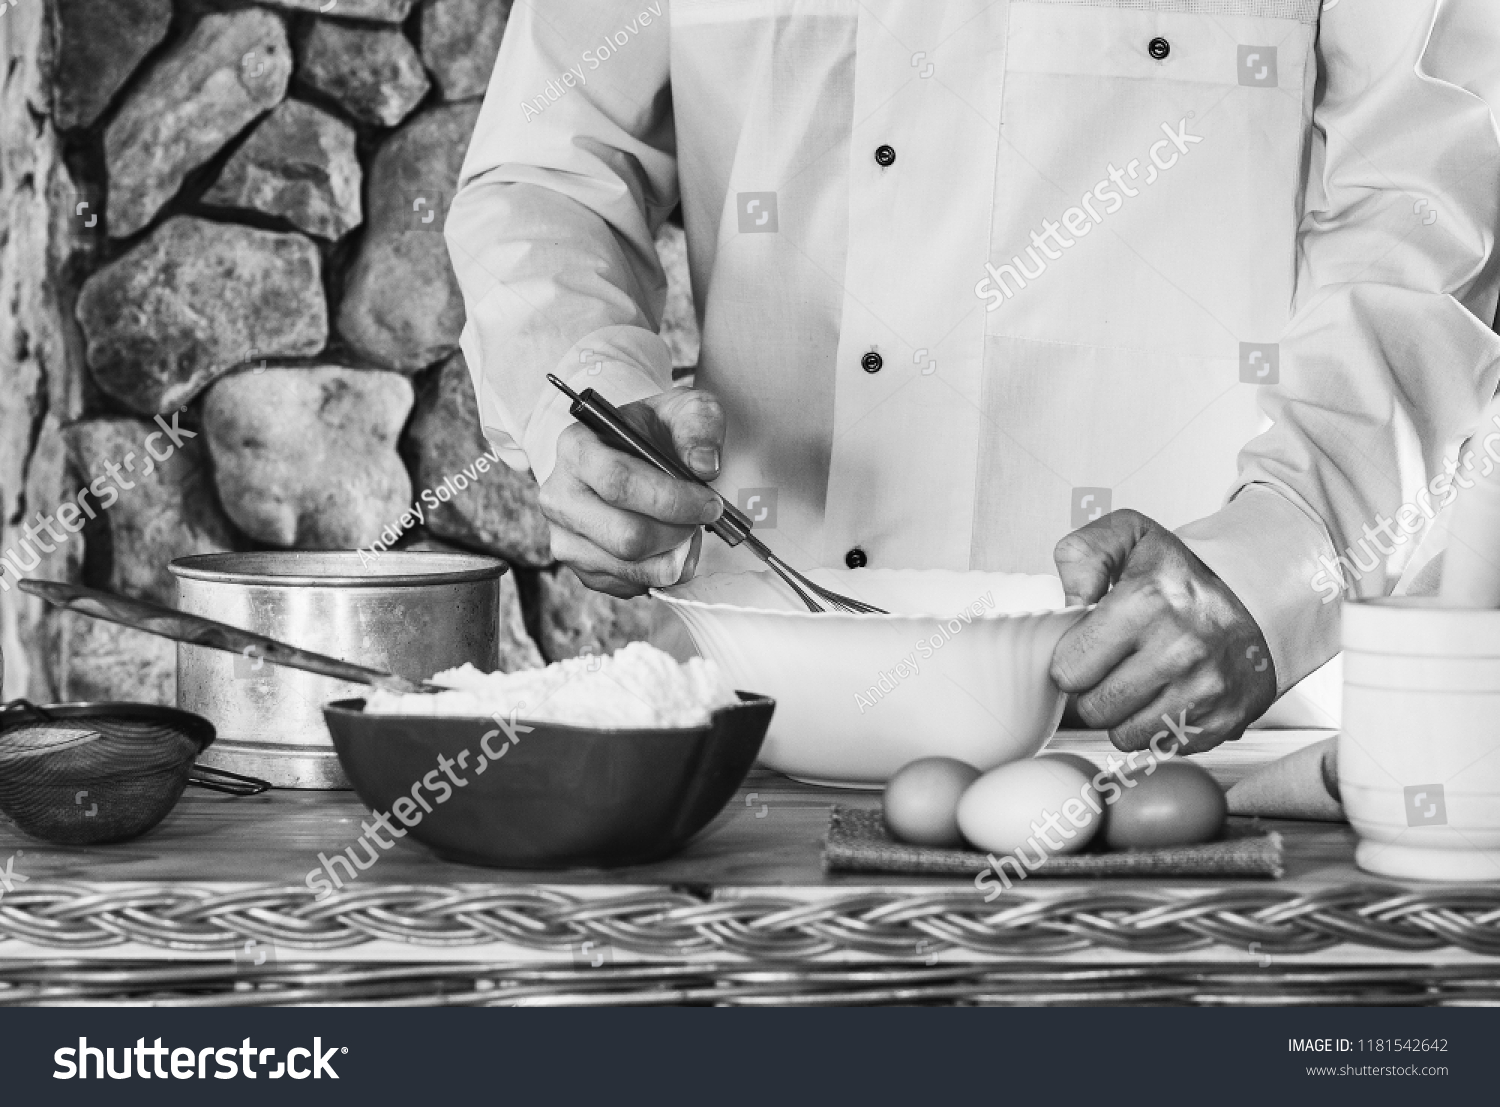 a male cook in a white garment whisk the whisk the batter, selective focus, black white photo #1181542642